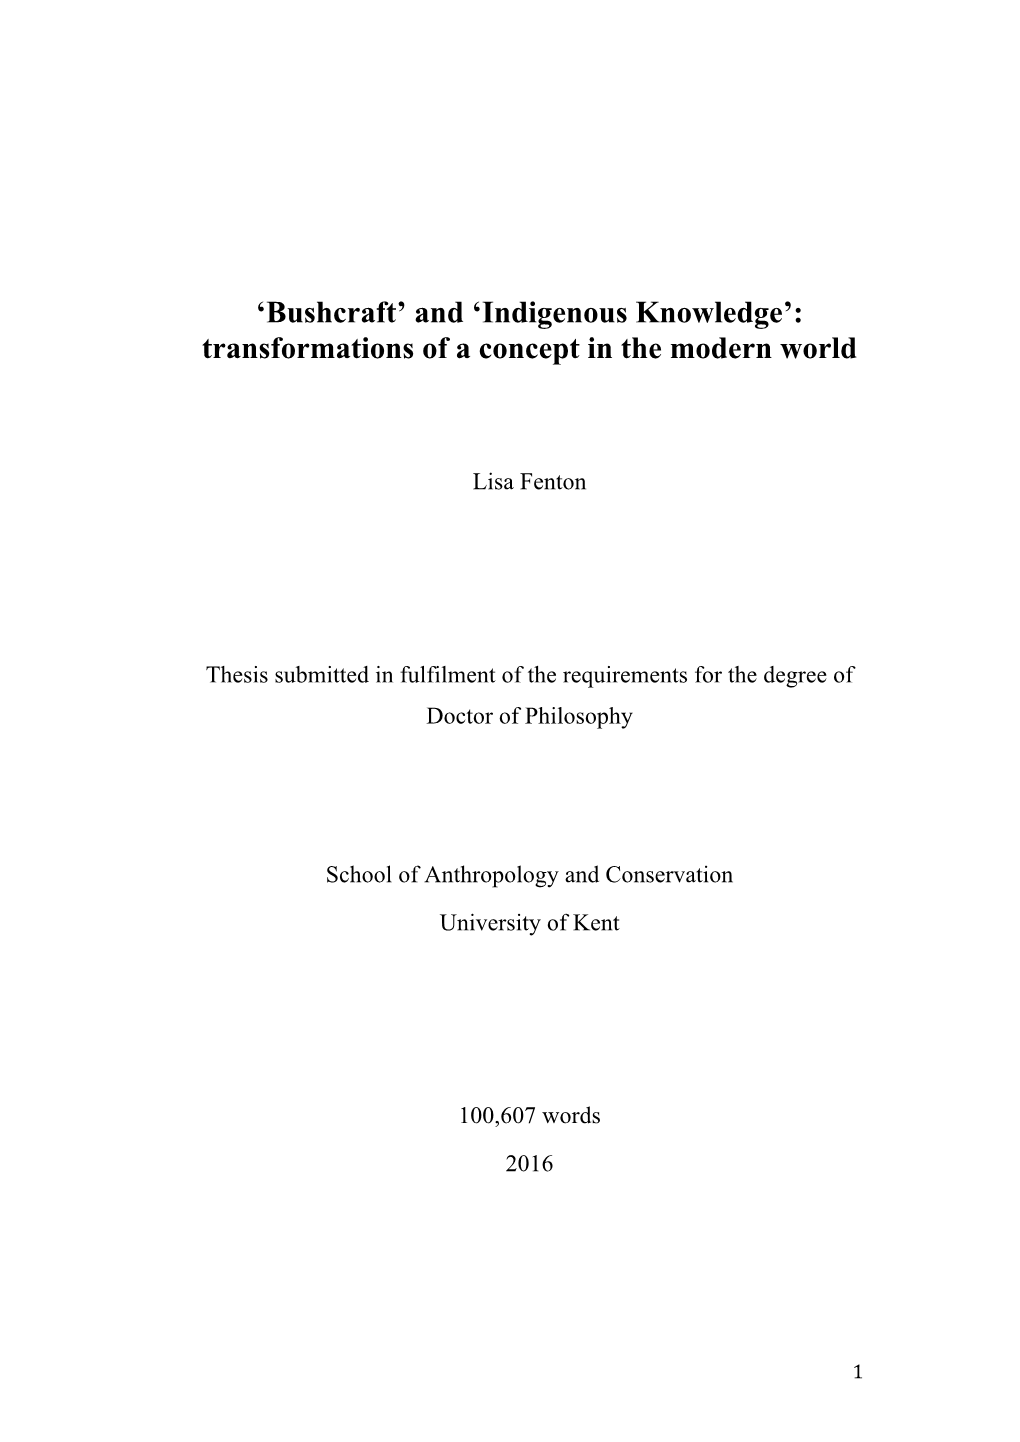 'Bushcraft' and 'Indigenous Knowledge': Transformations of a Concept